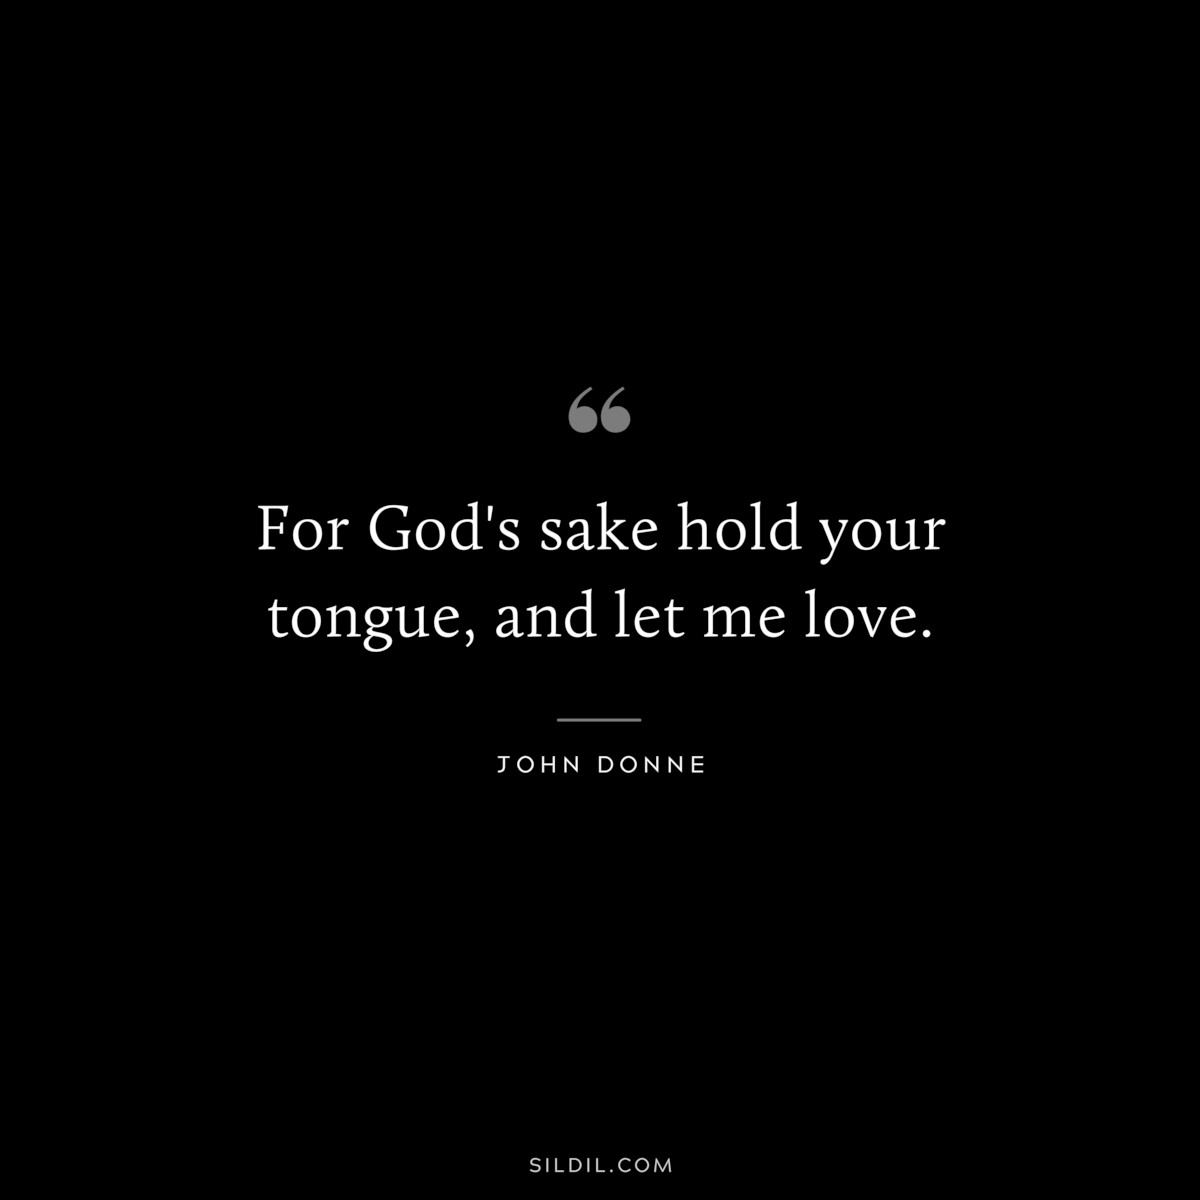 For God's sake hold your tongue, and let me love. ― John Donne